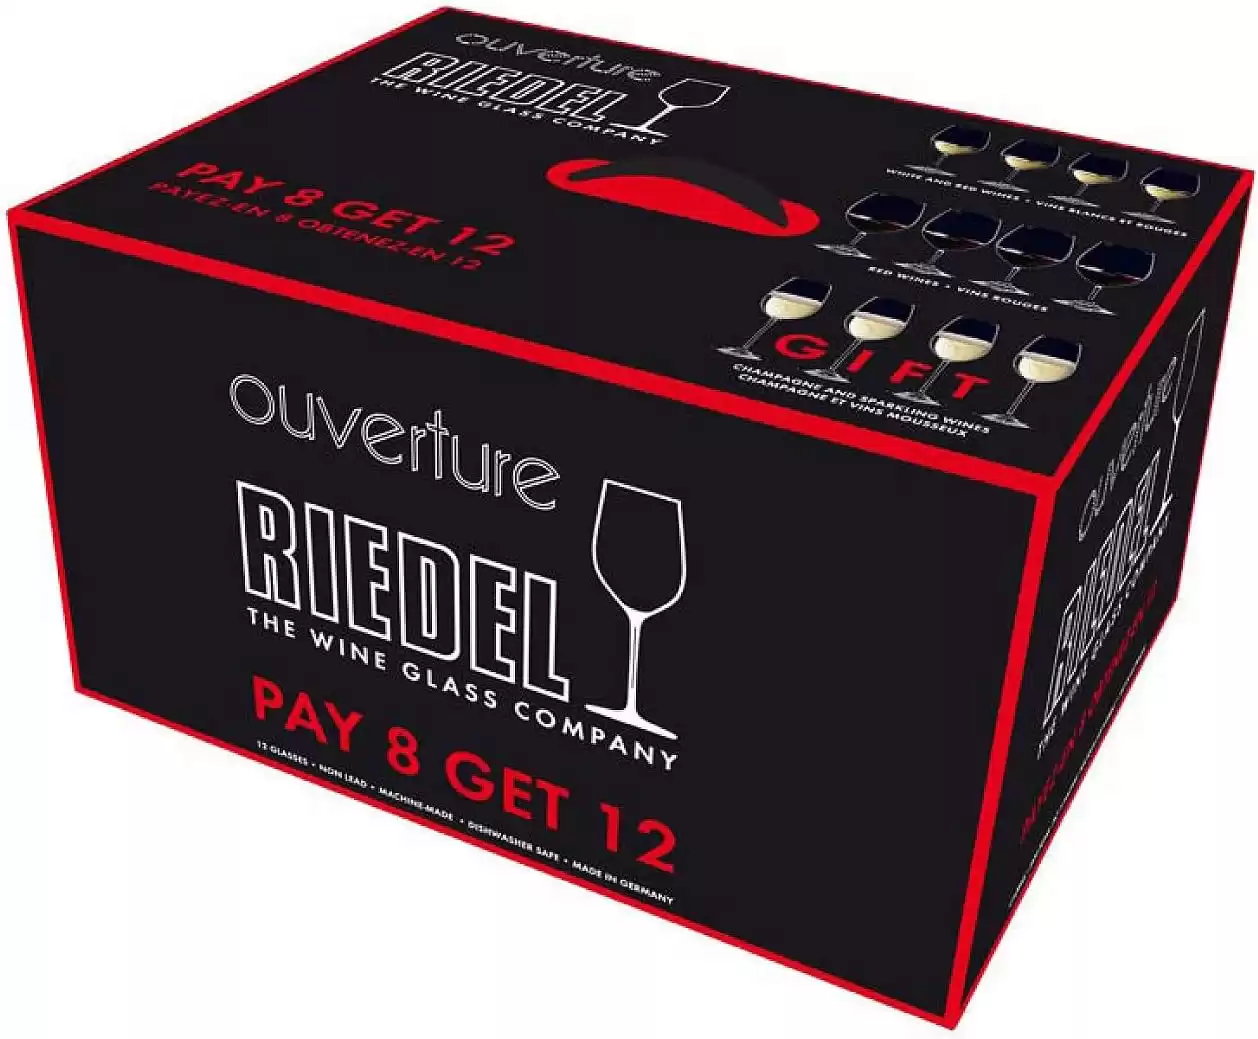 Riedel Ouverture Wine Glass, Set of 12 Red, White & Champagne Glasses